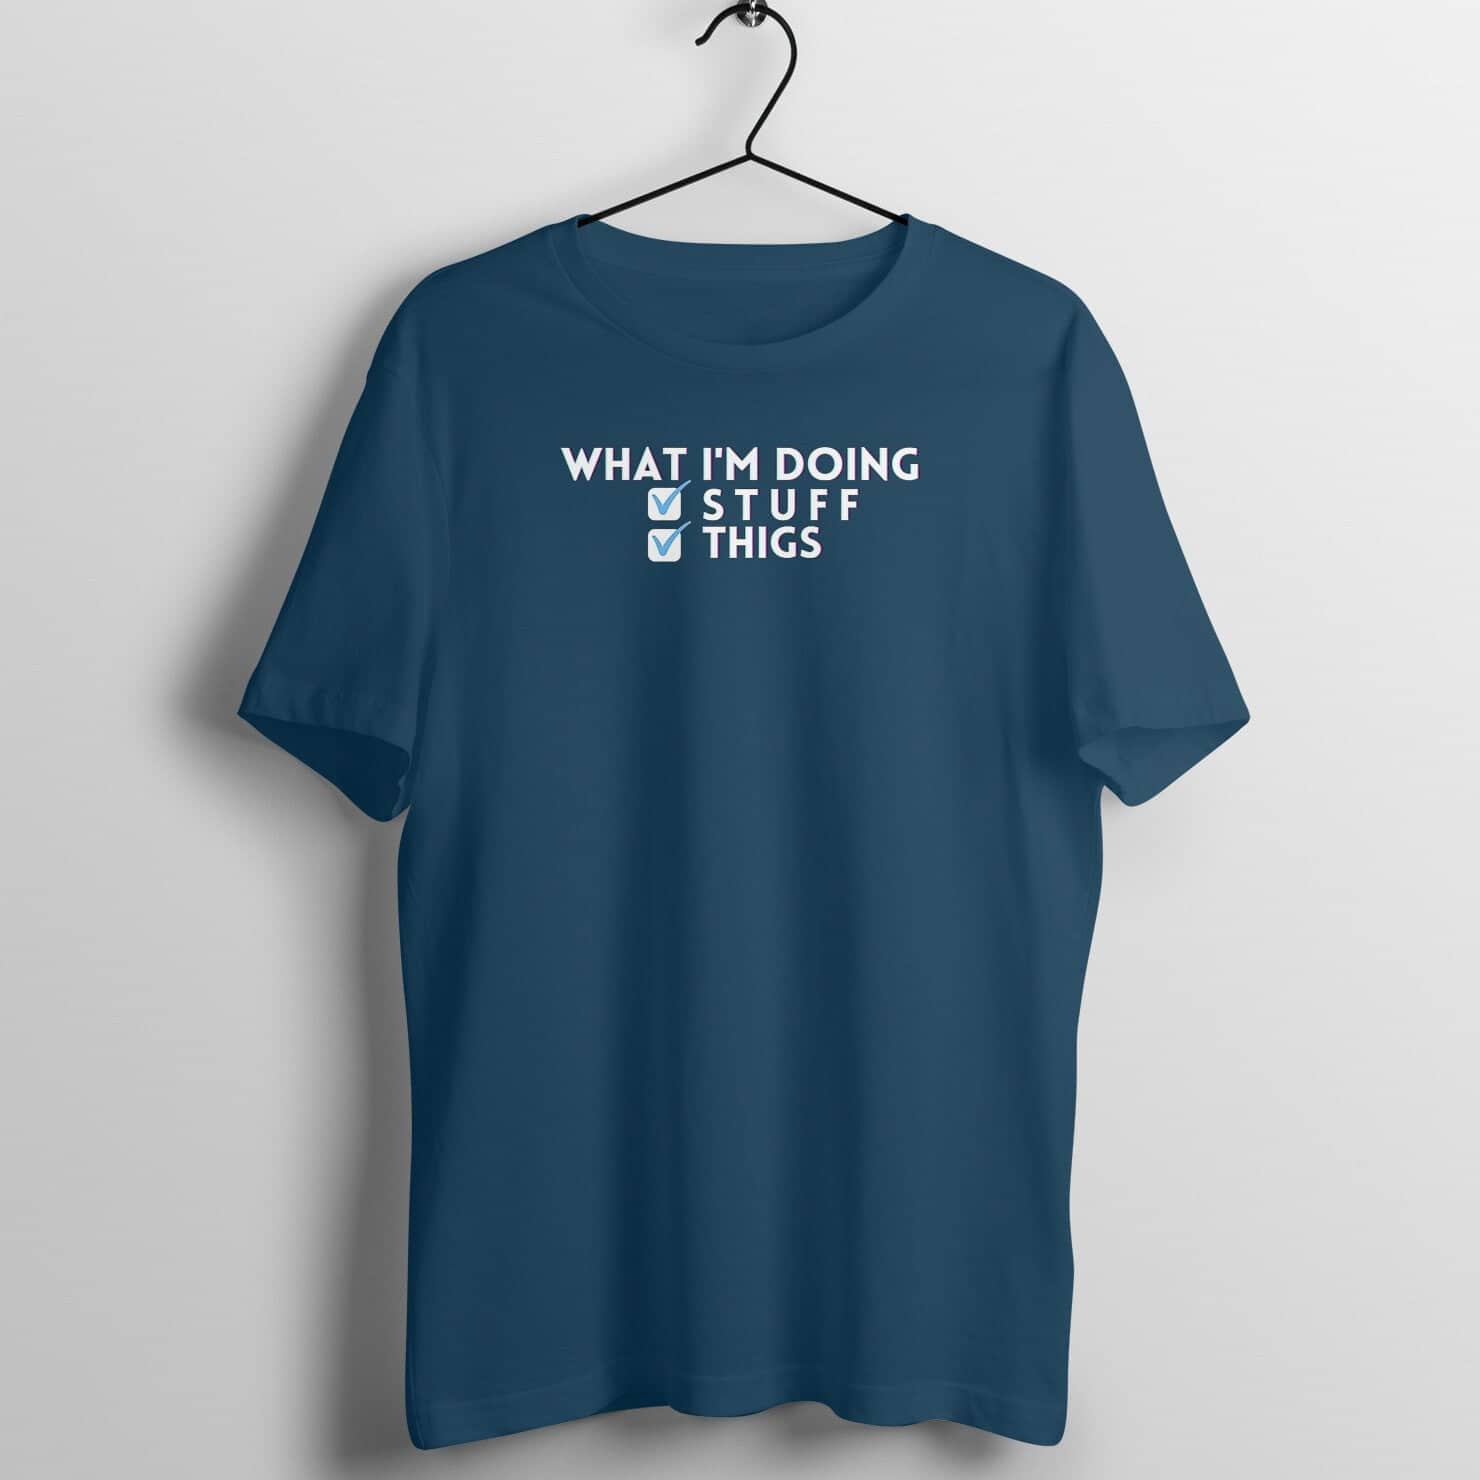 What I'm Doing Stuff Things Funny Navy Blue T Shirt for Men and Women freeshipping - Catch My Drift India